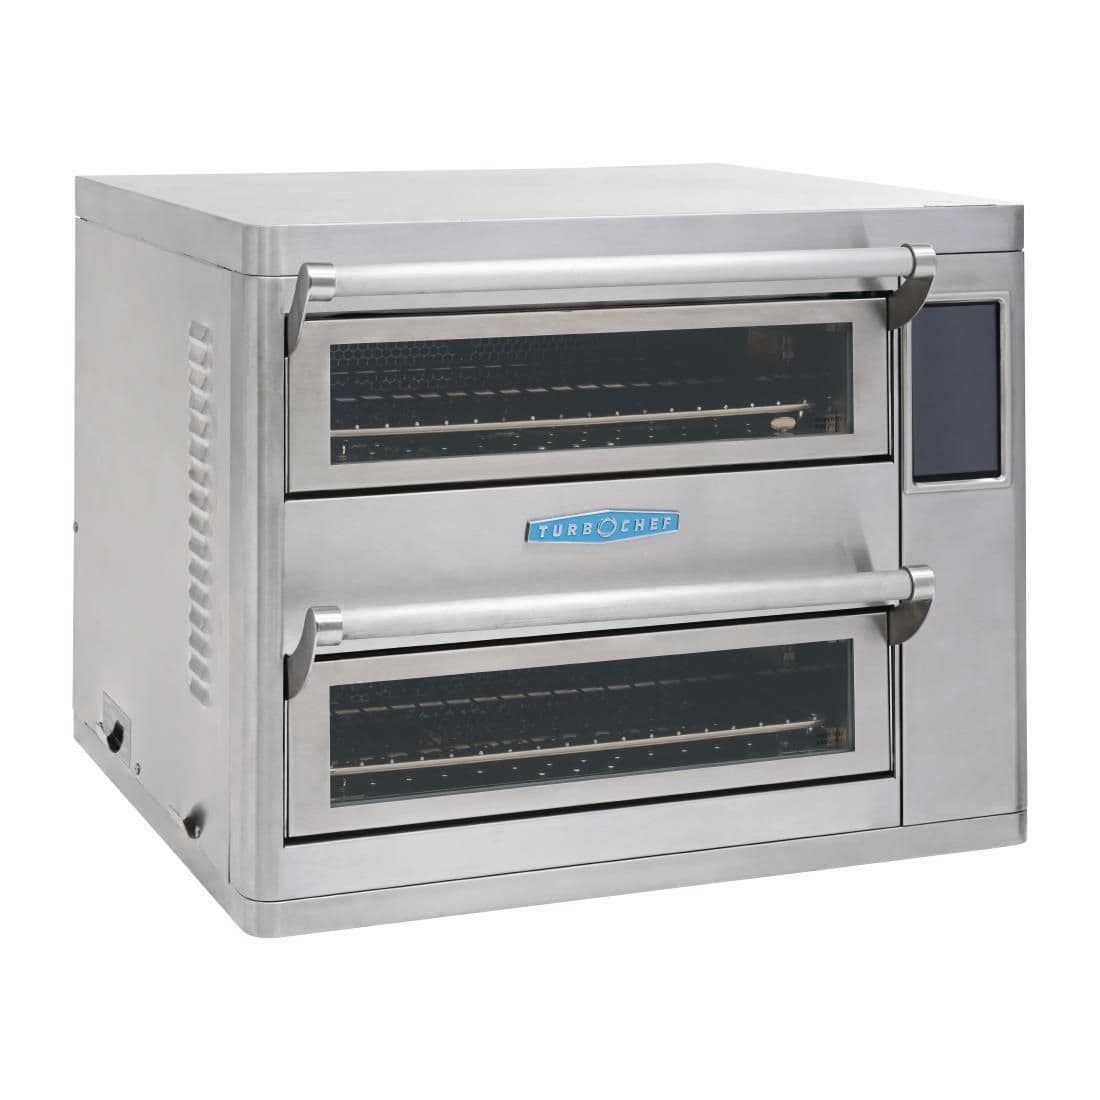 FP881 Turbochef Double Batch Oven JD Catering Equipment Solutions Ltd